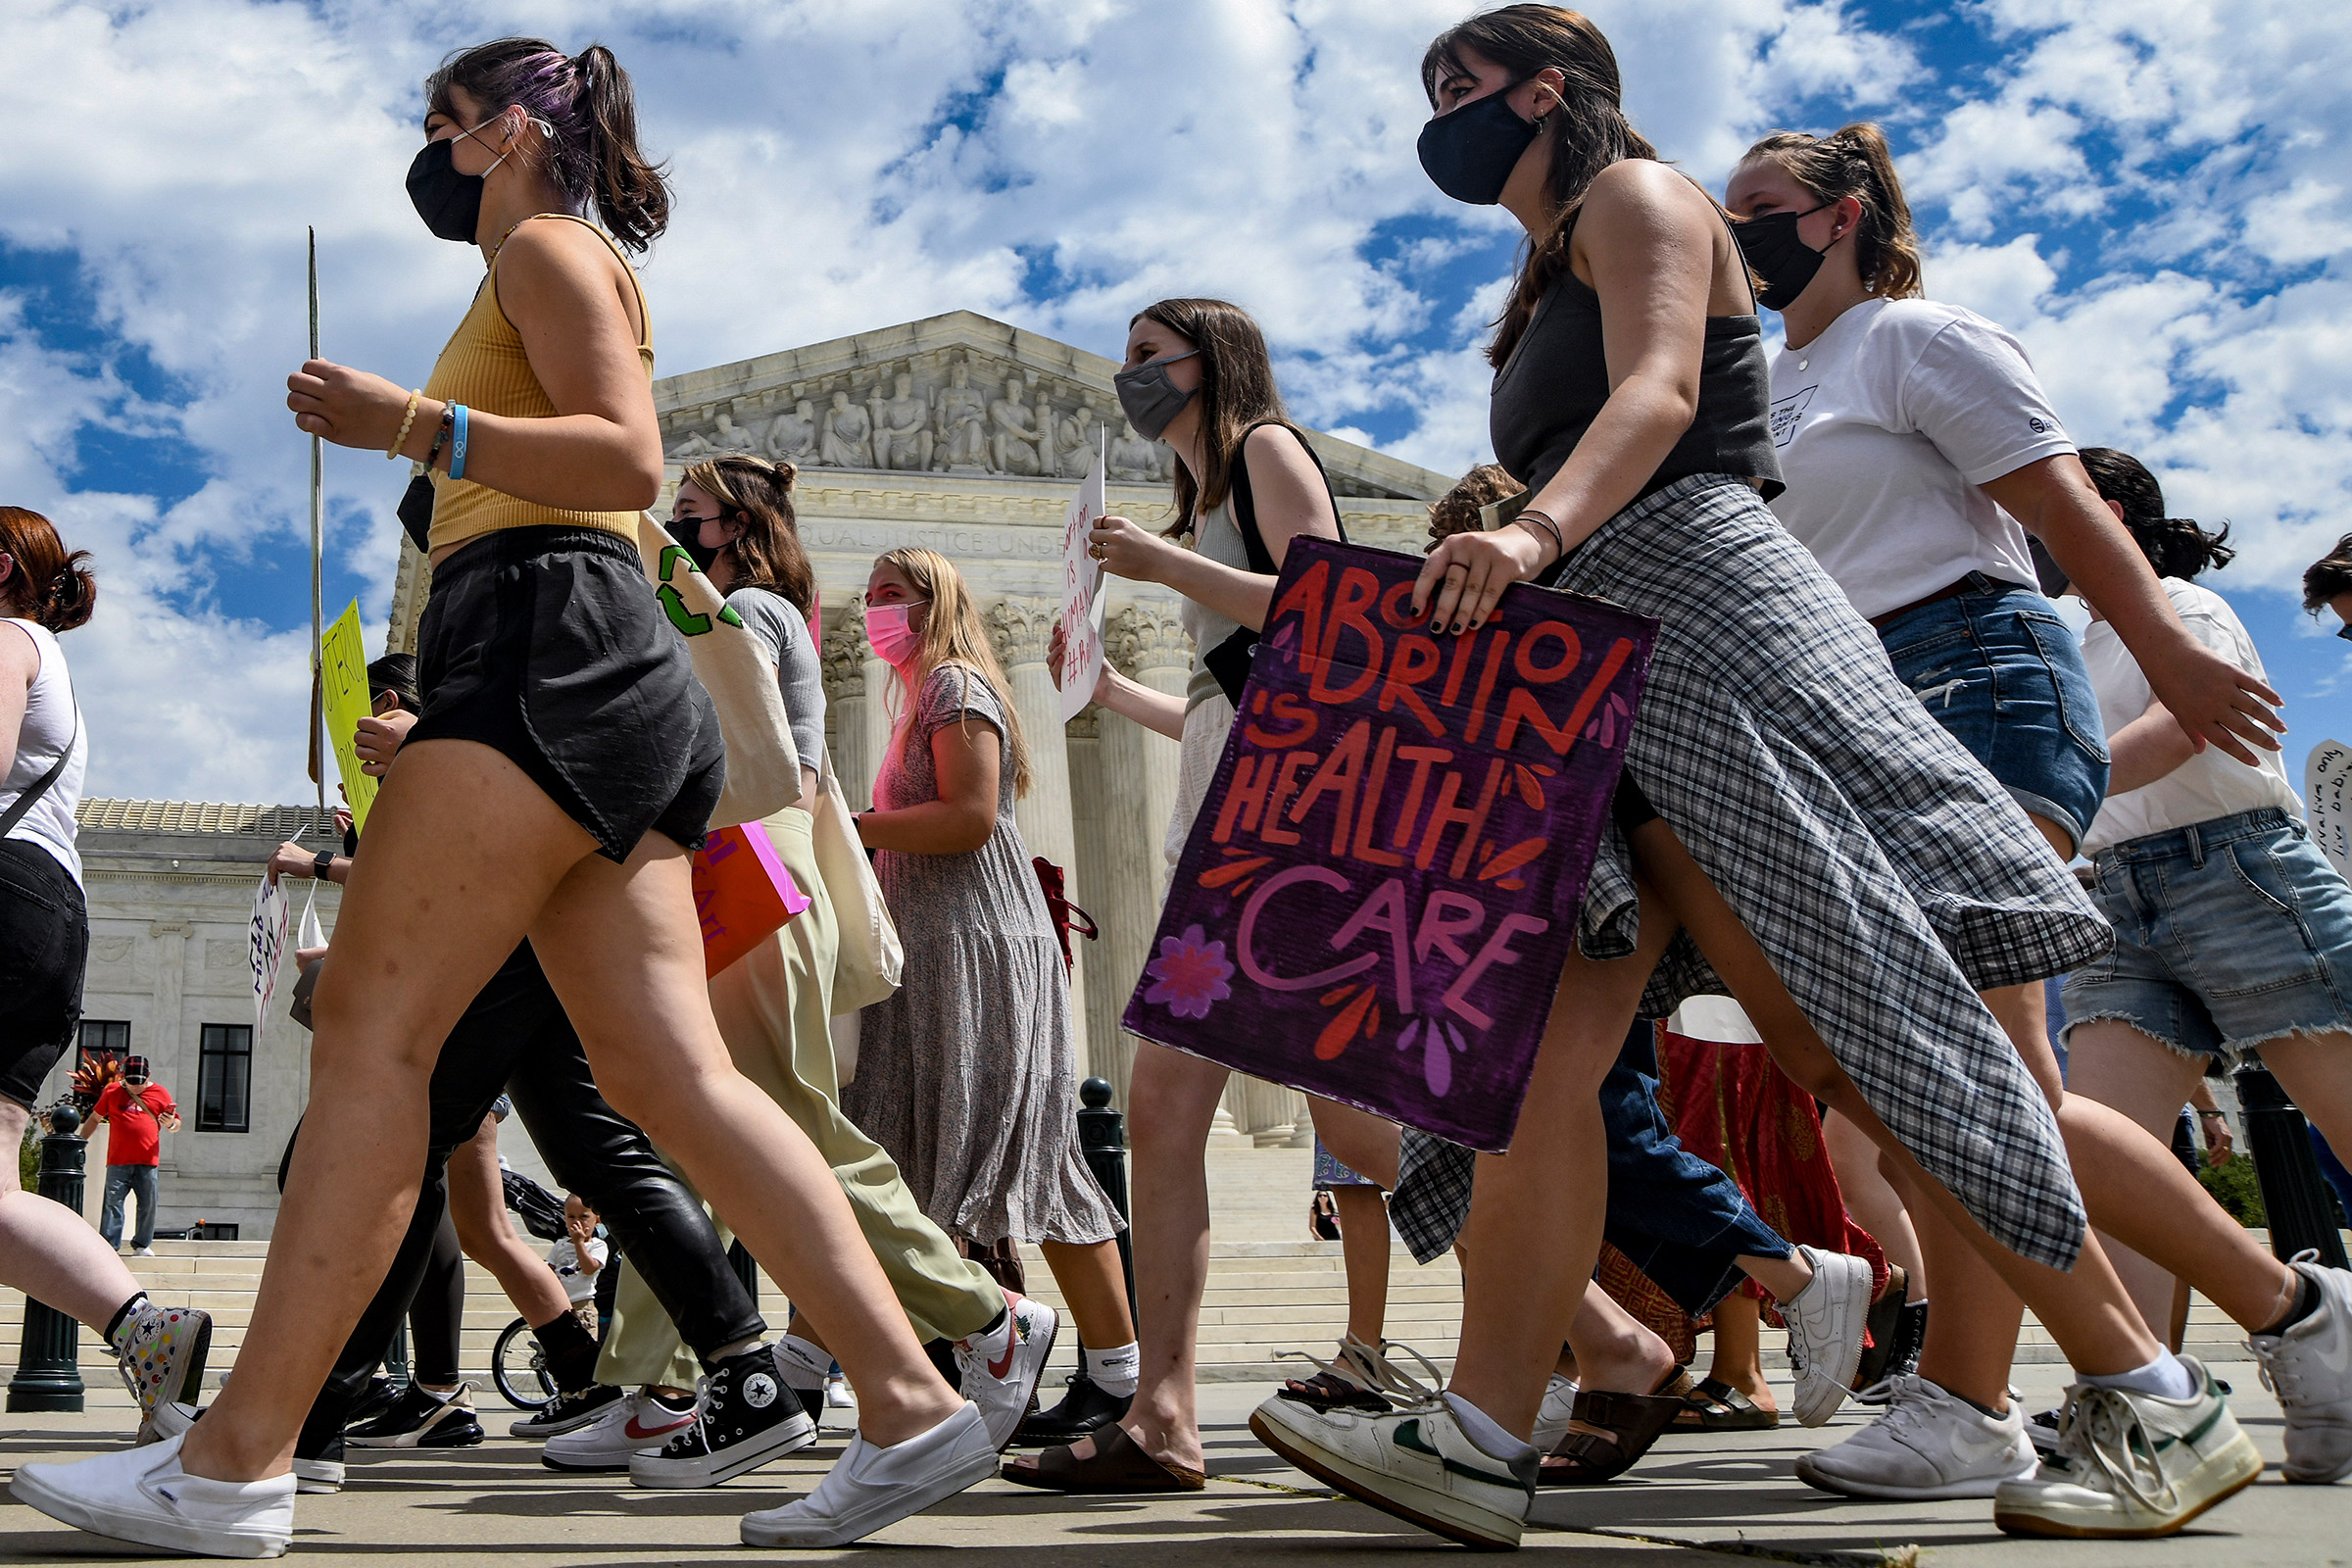 Demonstrators outside the U.S. Supreme Court in Washington, D.C., days after the justices declined to block a near-total ban on abortion in Texas, Sept. 4, 2021. (Kenny Holston—The New York Times/Redux)